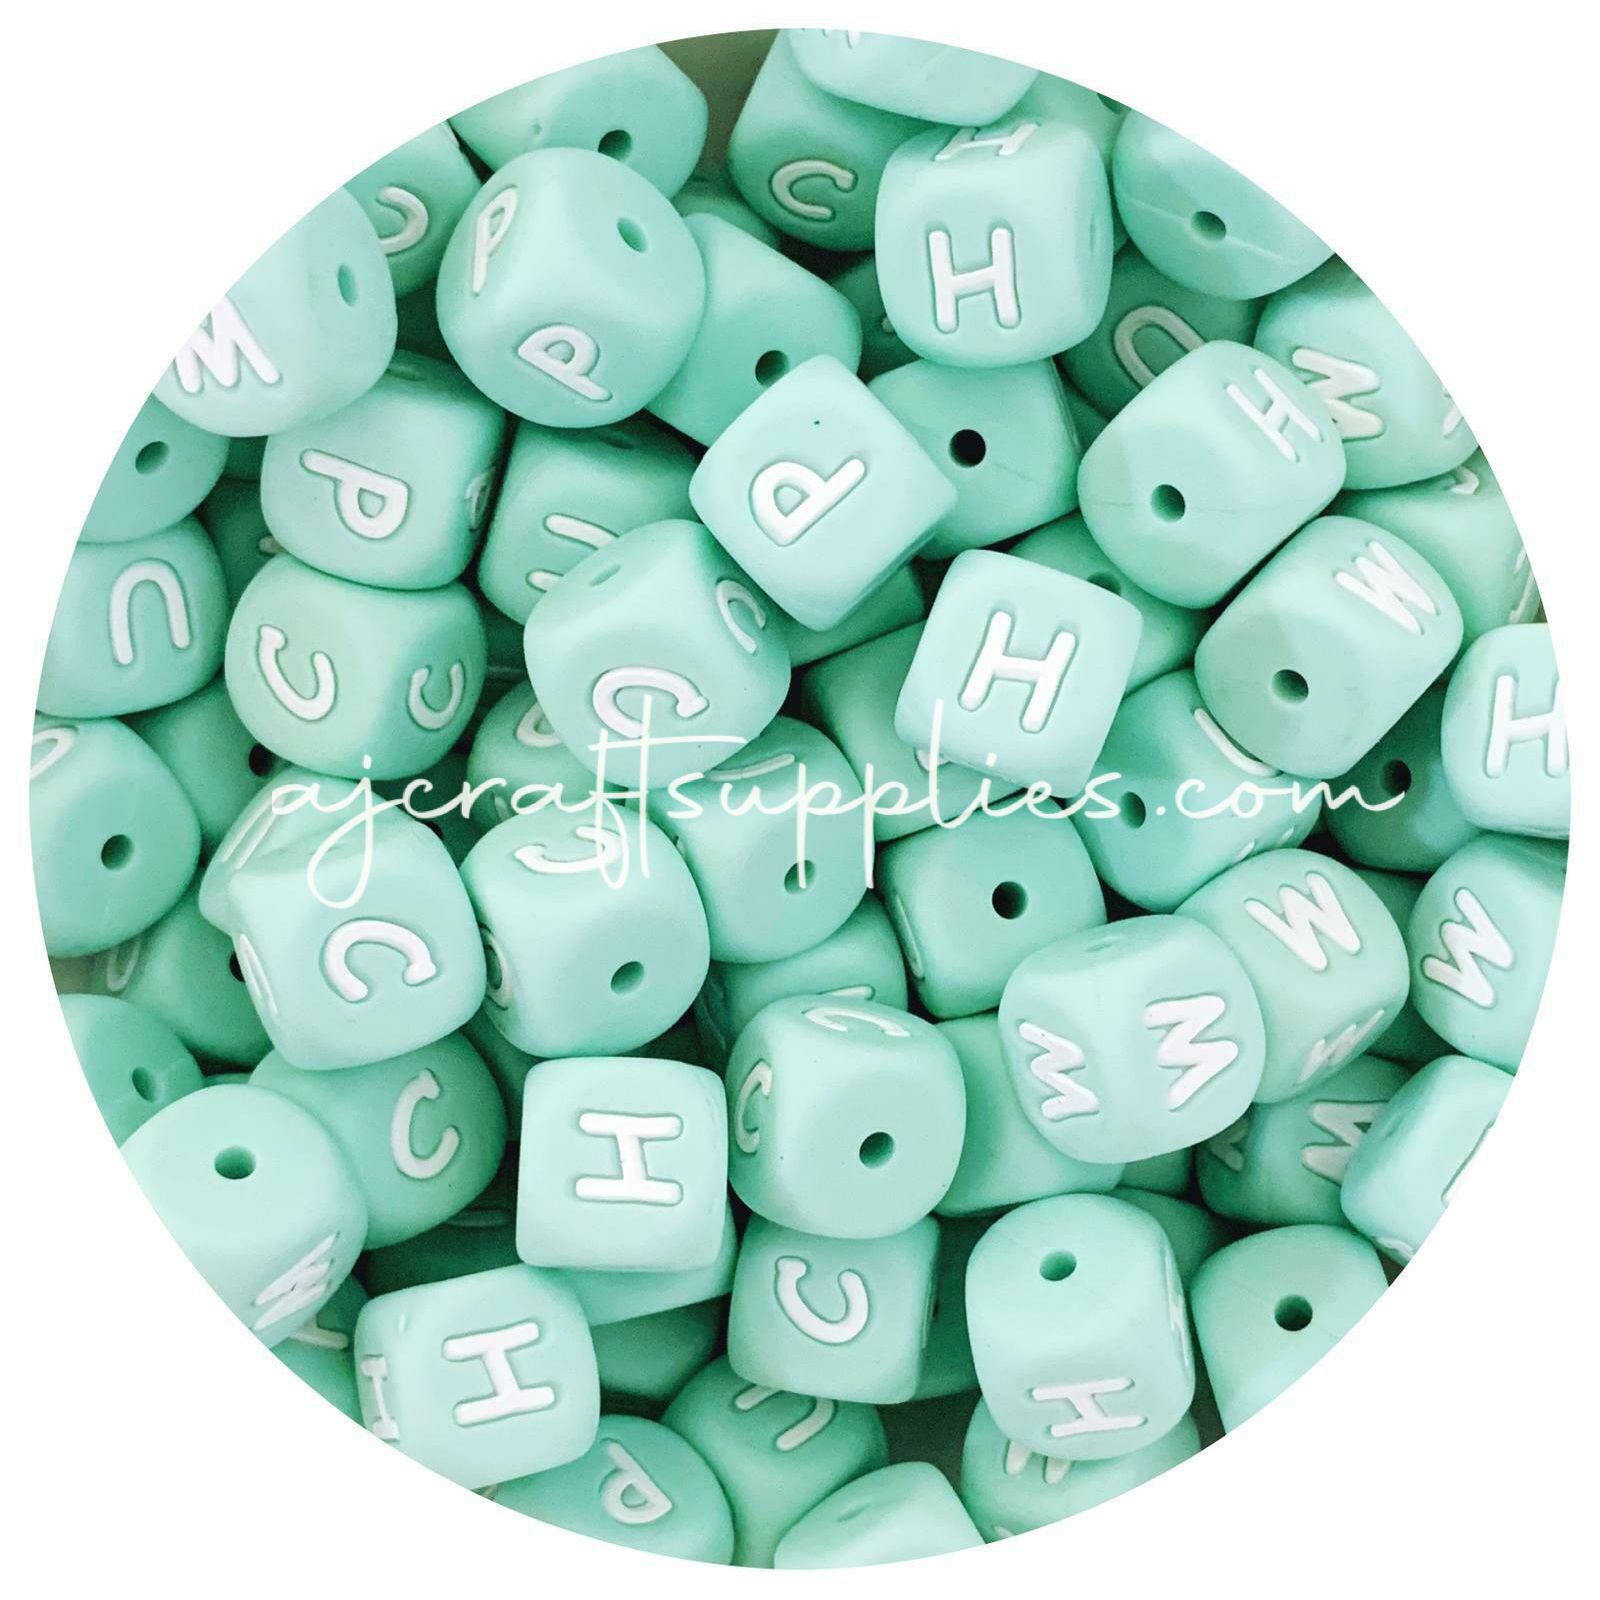 12mm Mint Green Silicone Letter Beads MIXED PACK - 50 beads